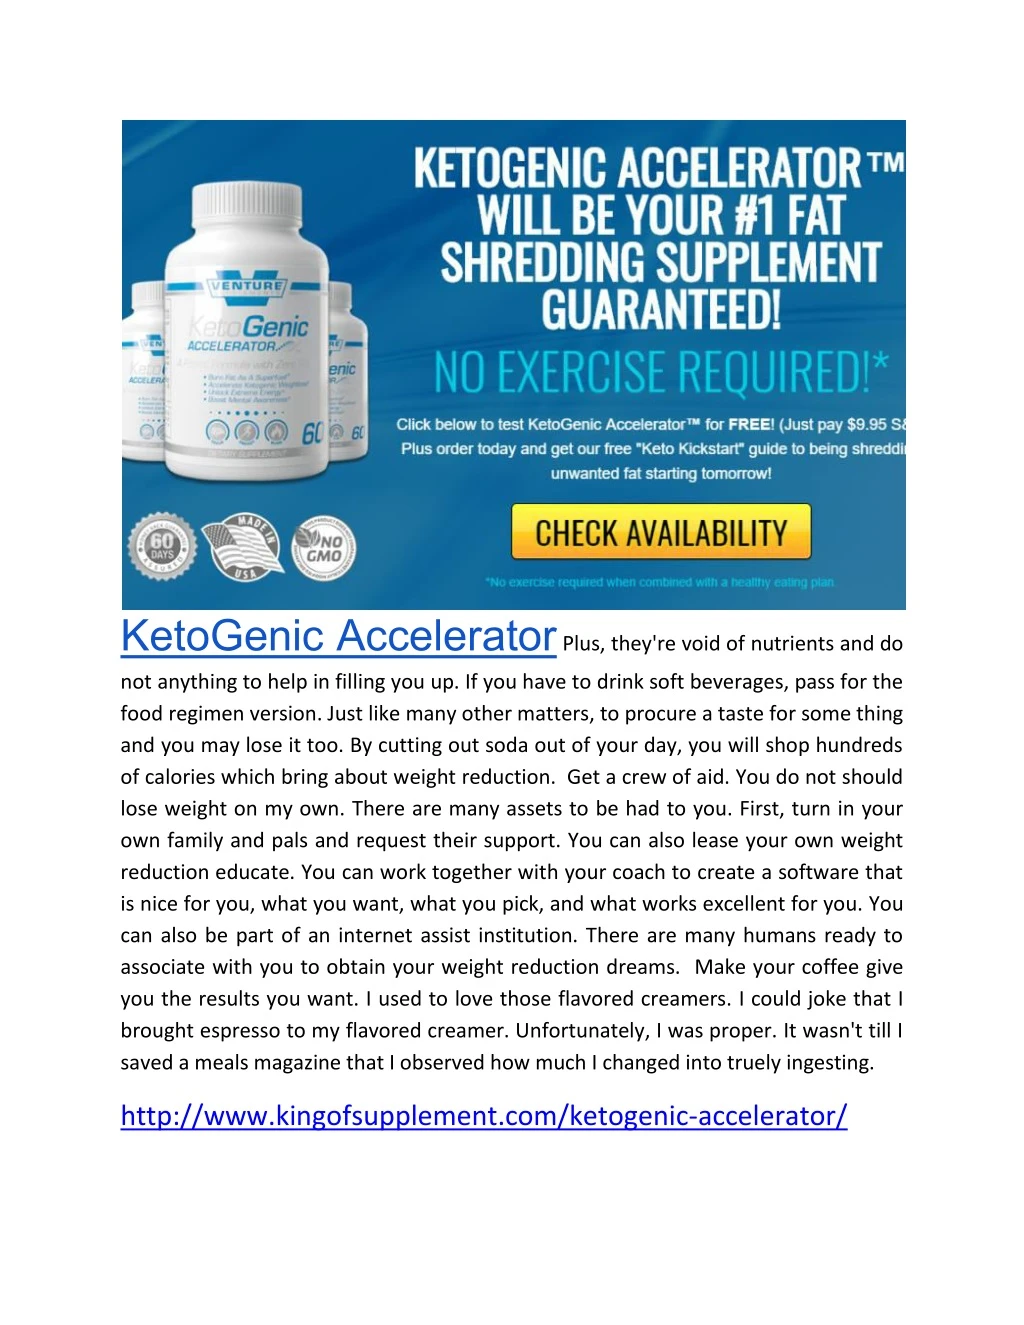 ketogenic accelerator plus they re void